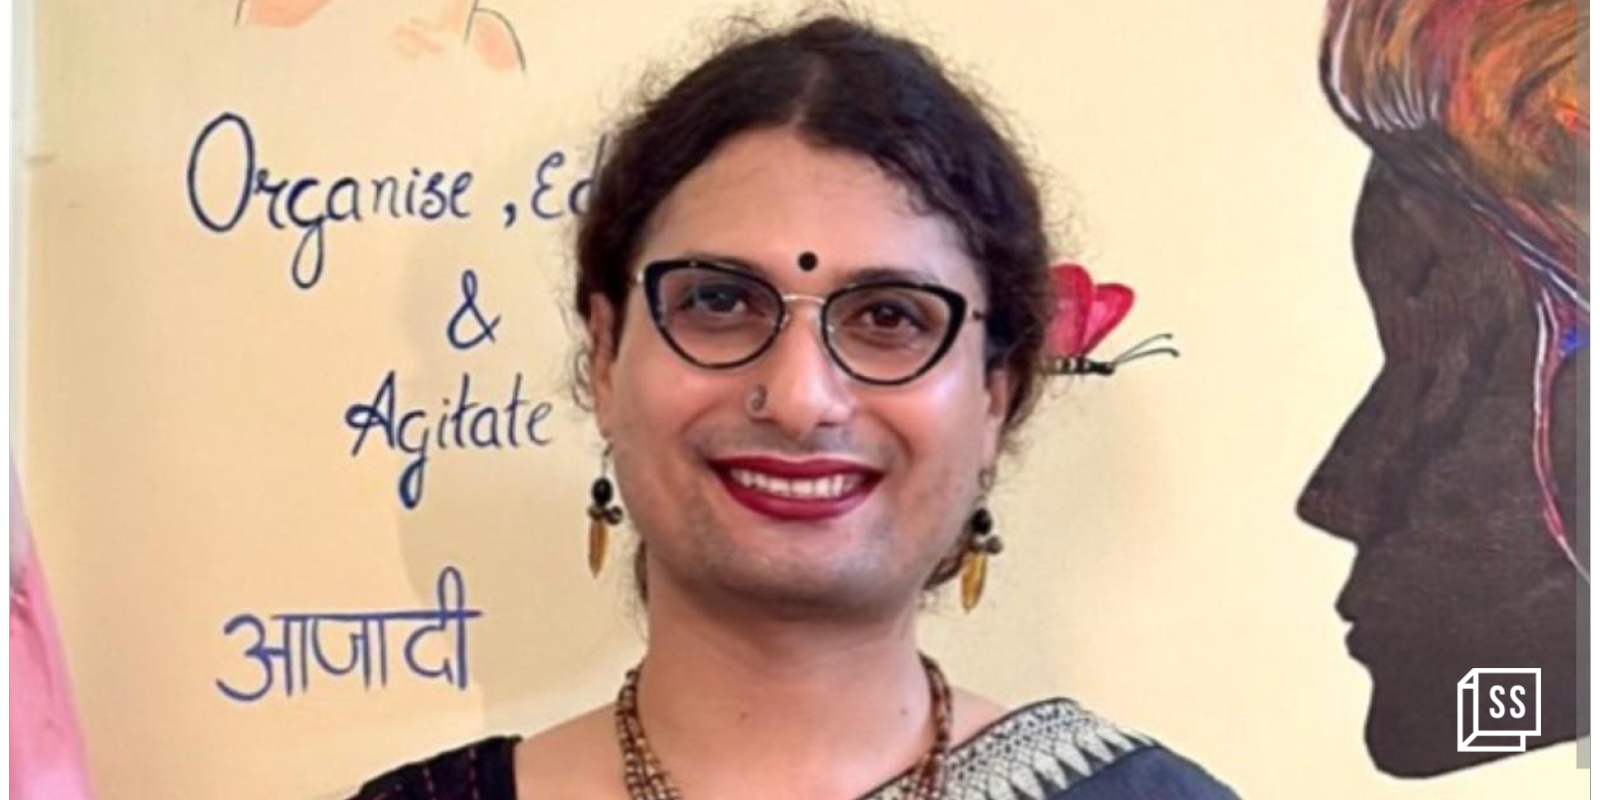 This trans leader is teaching her village to reclaim social and cultural spaces